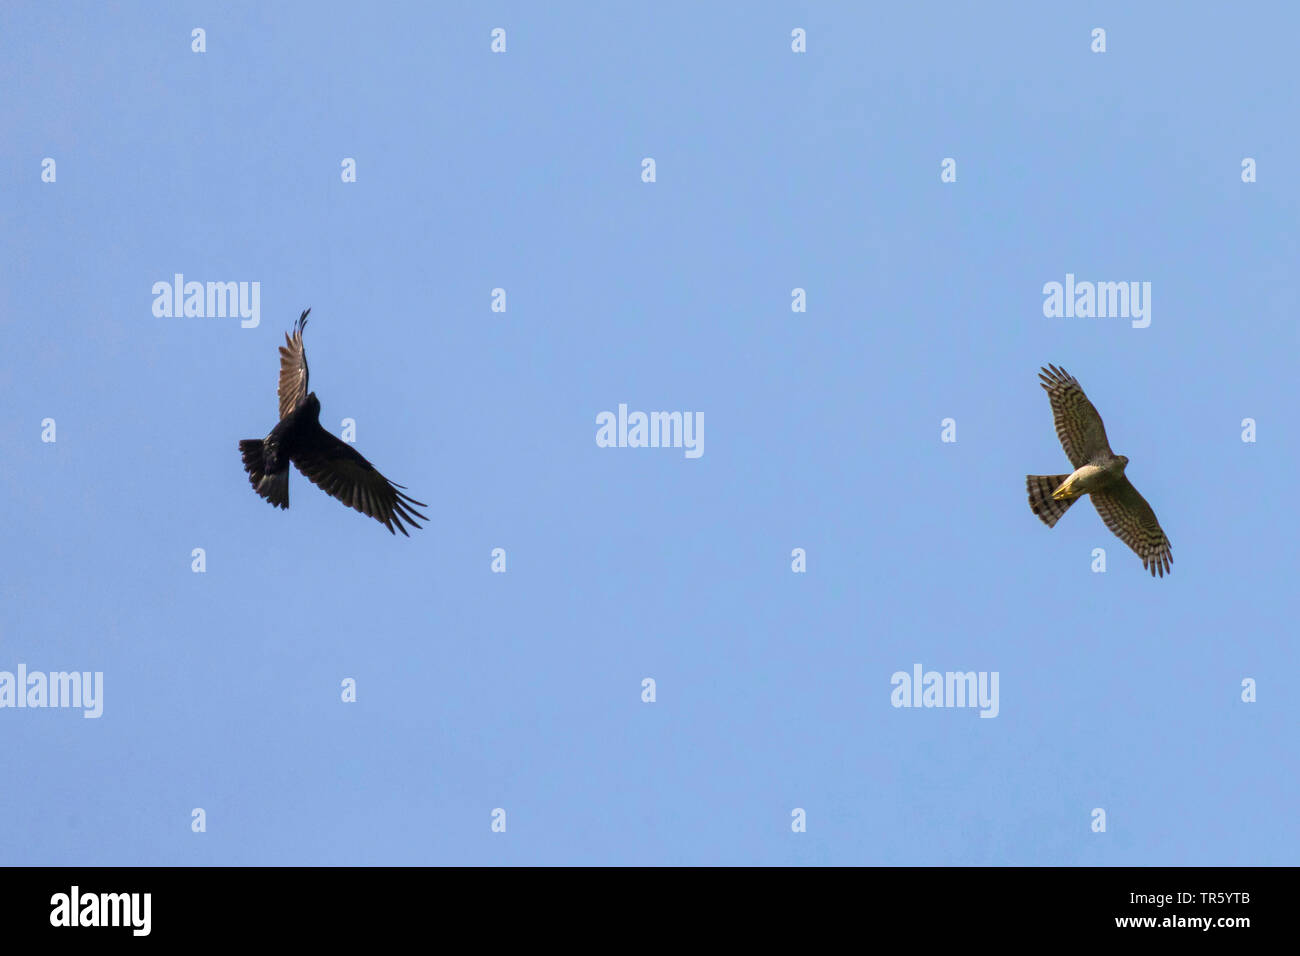 northern sparrow hawk (Accipiter nisus), gliding, attacked by a Carrion crow, Germany, Bavaria, Staffelsee Stock Photo